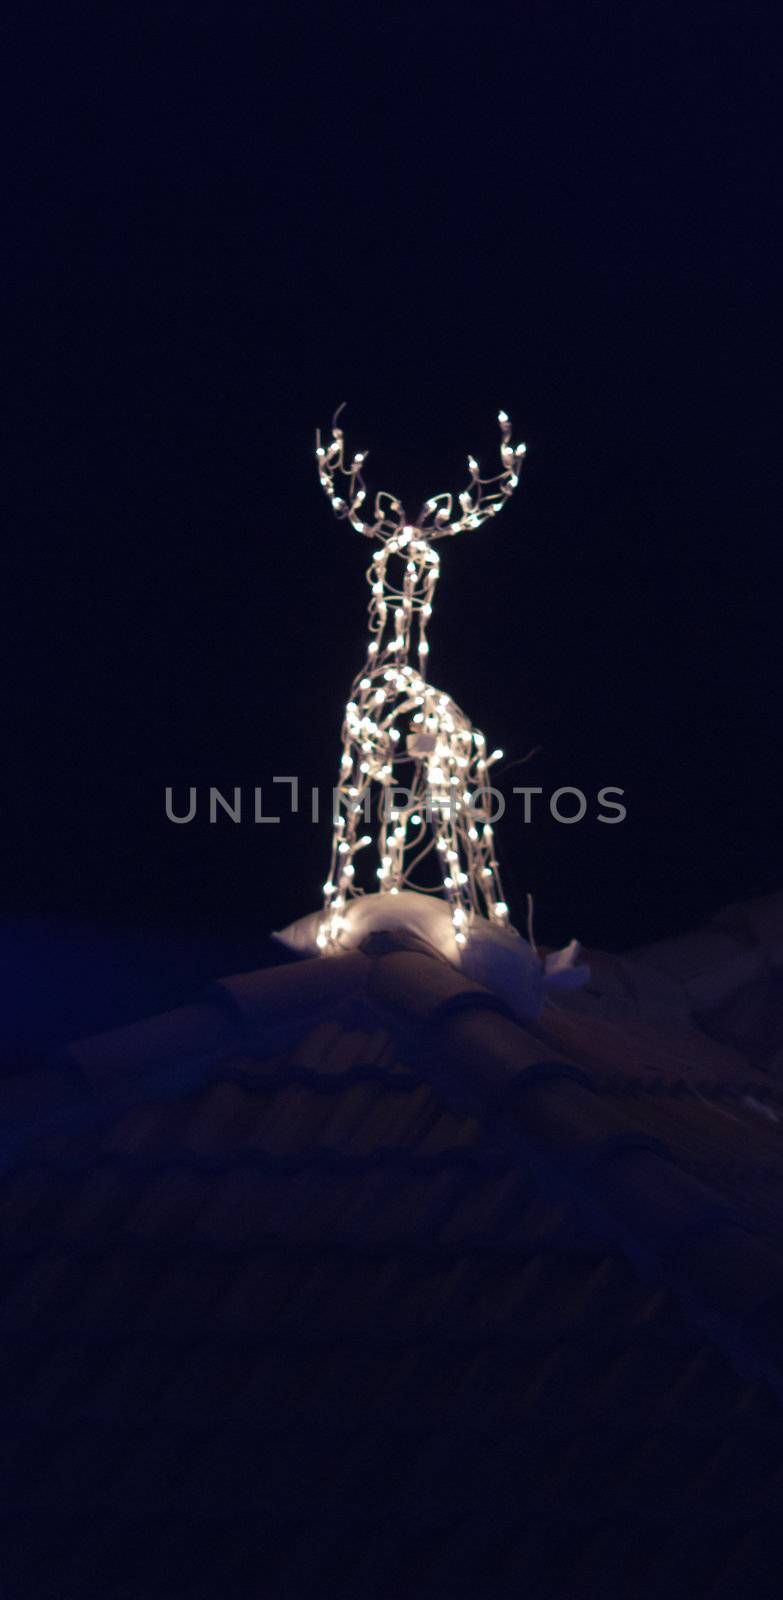 Lighted Reindeers for Christmas by toliknik